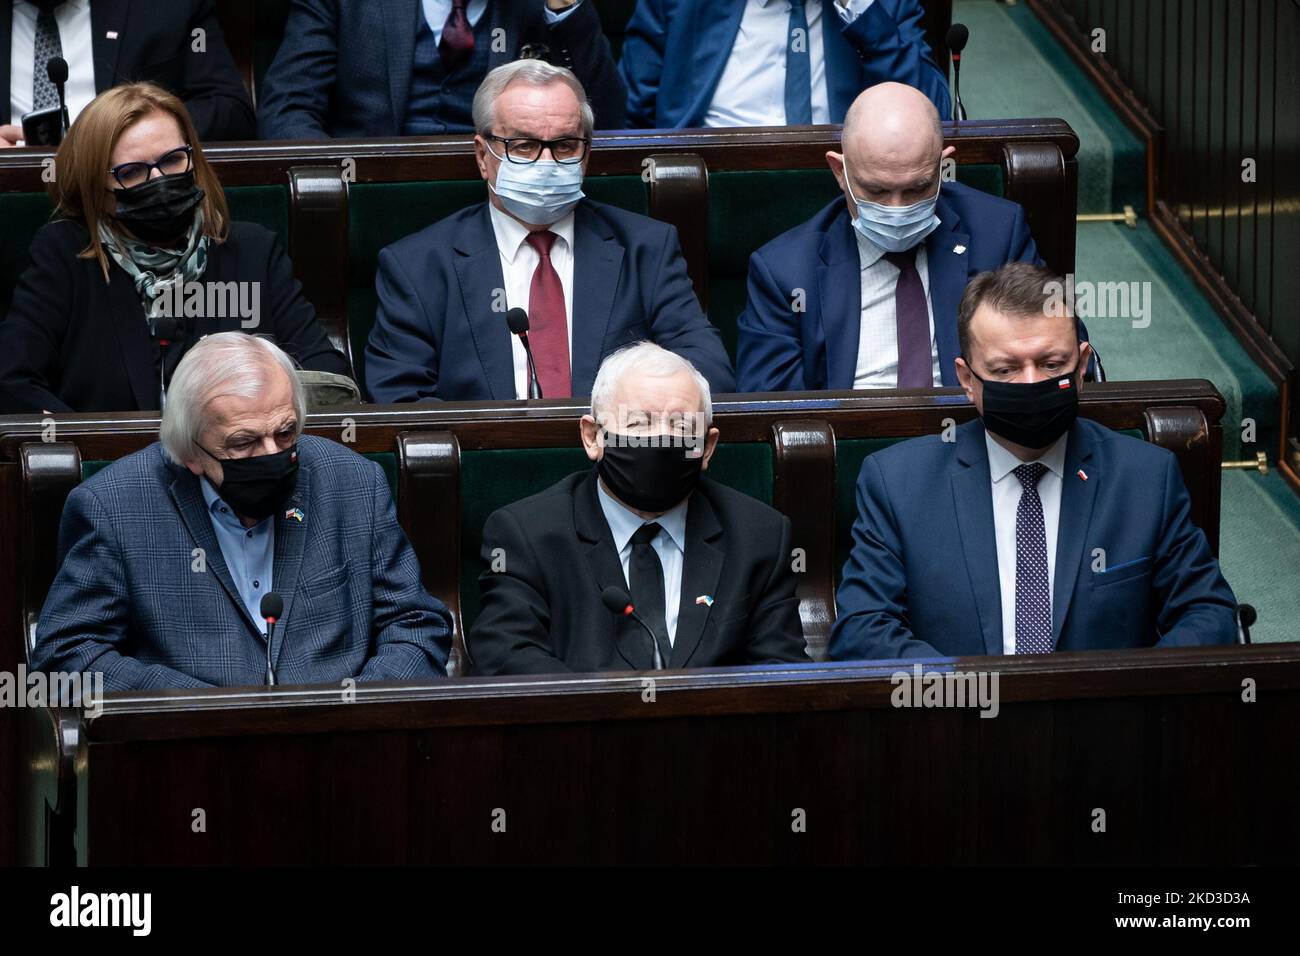 Leader of the Polish Law and Justice (PiS) ruling party Jaroslaw Kaczynski (C), Polish Deputy Sejm Speaker Ryszard Terlecki (L) and Polish Defense Minister Mariusz Blaszczak (R), during the 49th session of the Sejm (lower house) in Warsaw, Poland, on 24 February 2022. Polish Parliament has passed a resolution condemning Russian aggression against Ukraine and calling on the international community to impose tough sanctions on Moscow. (Photo by Mateusz Wlodarczyk/NurPhoto) Stock Photo